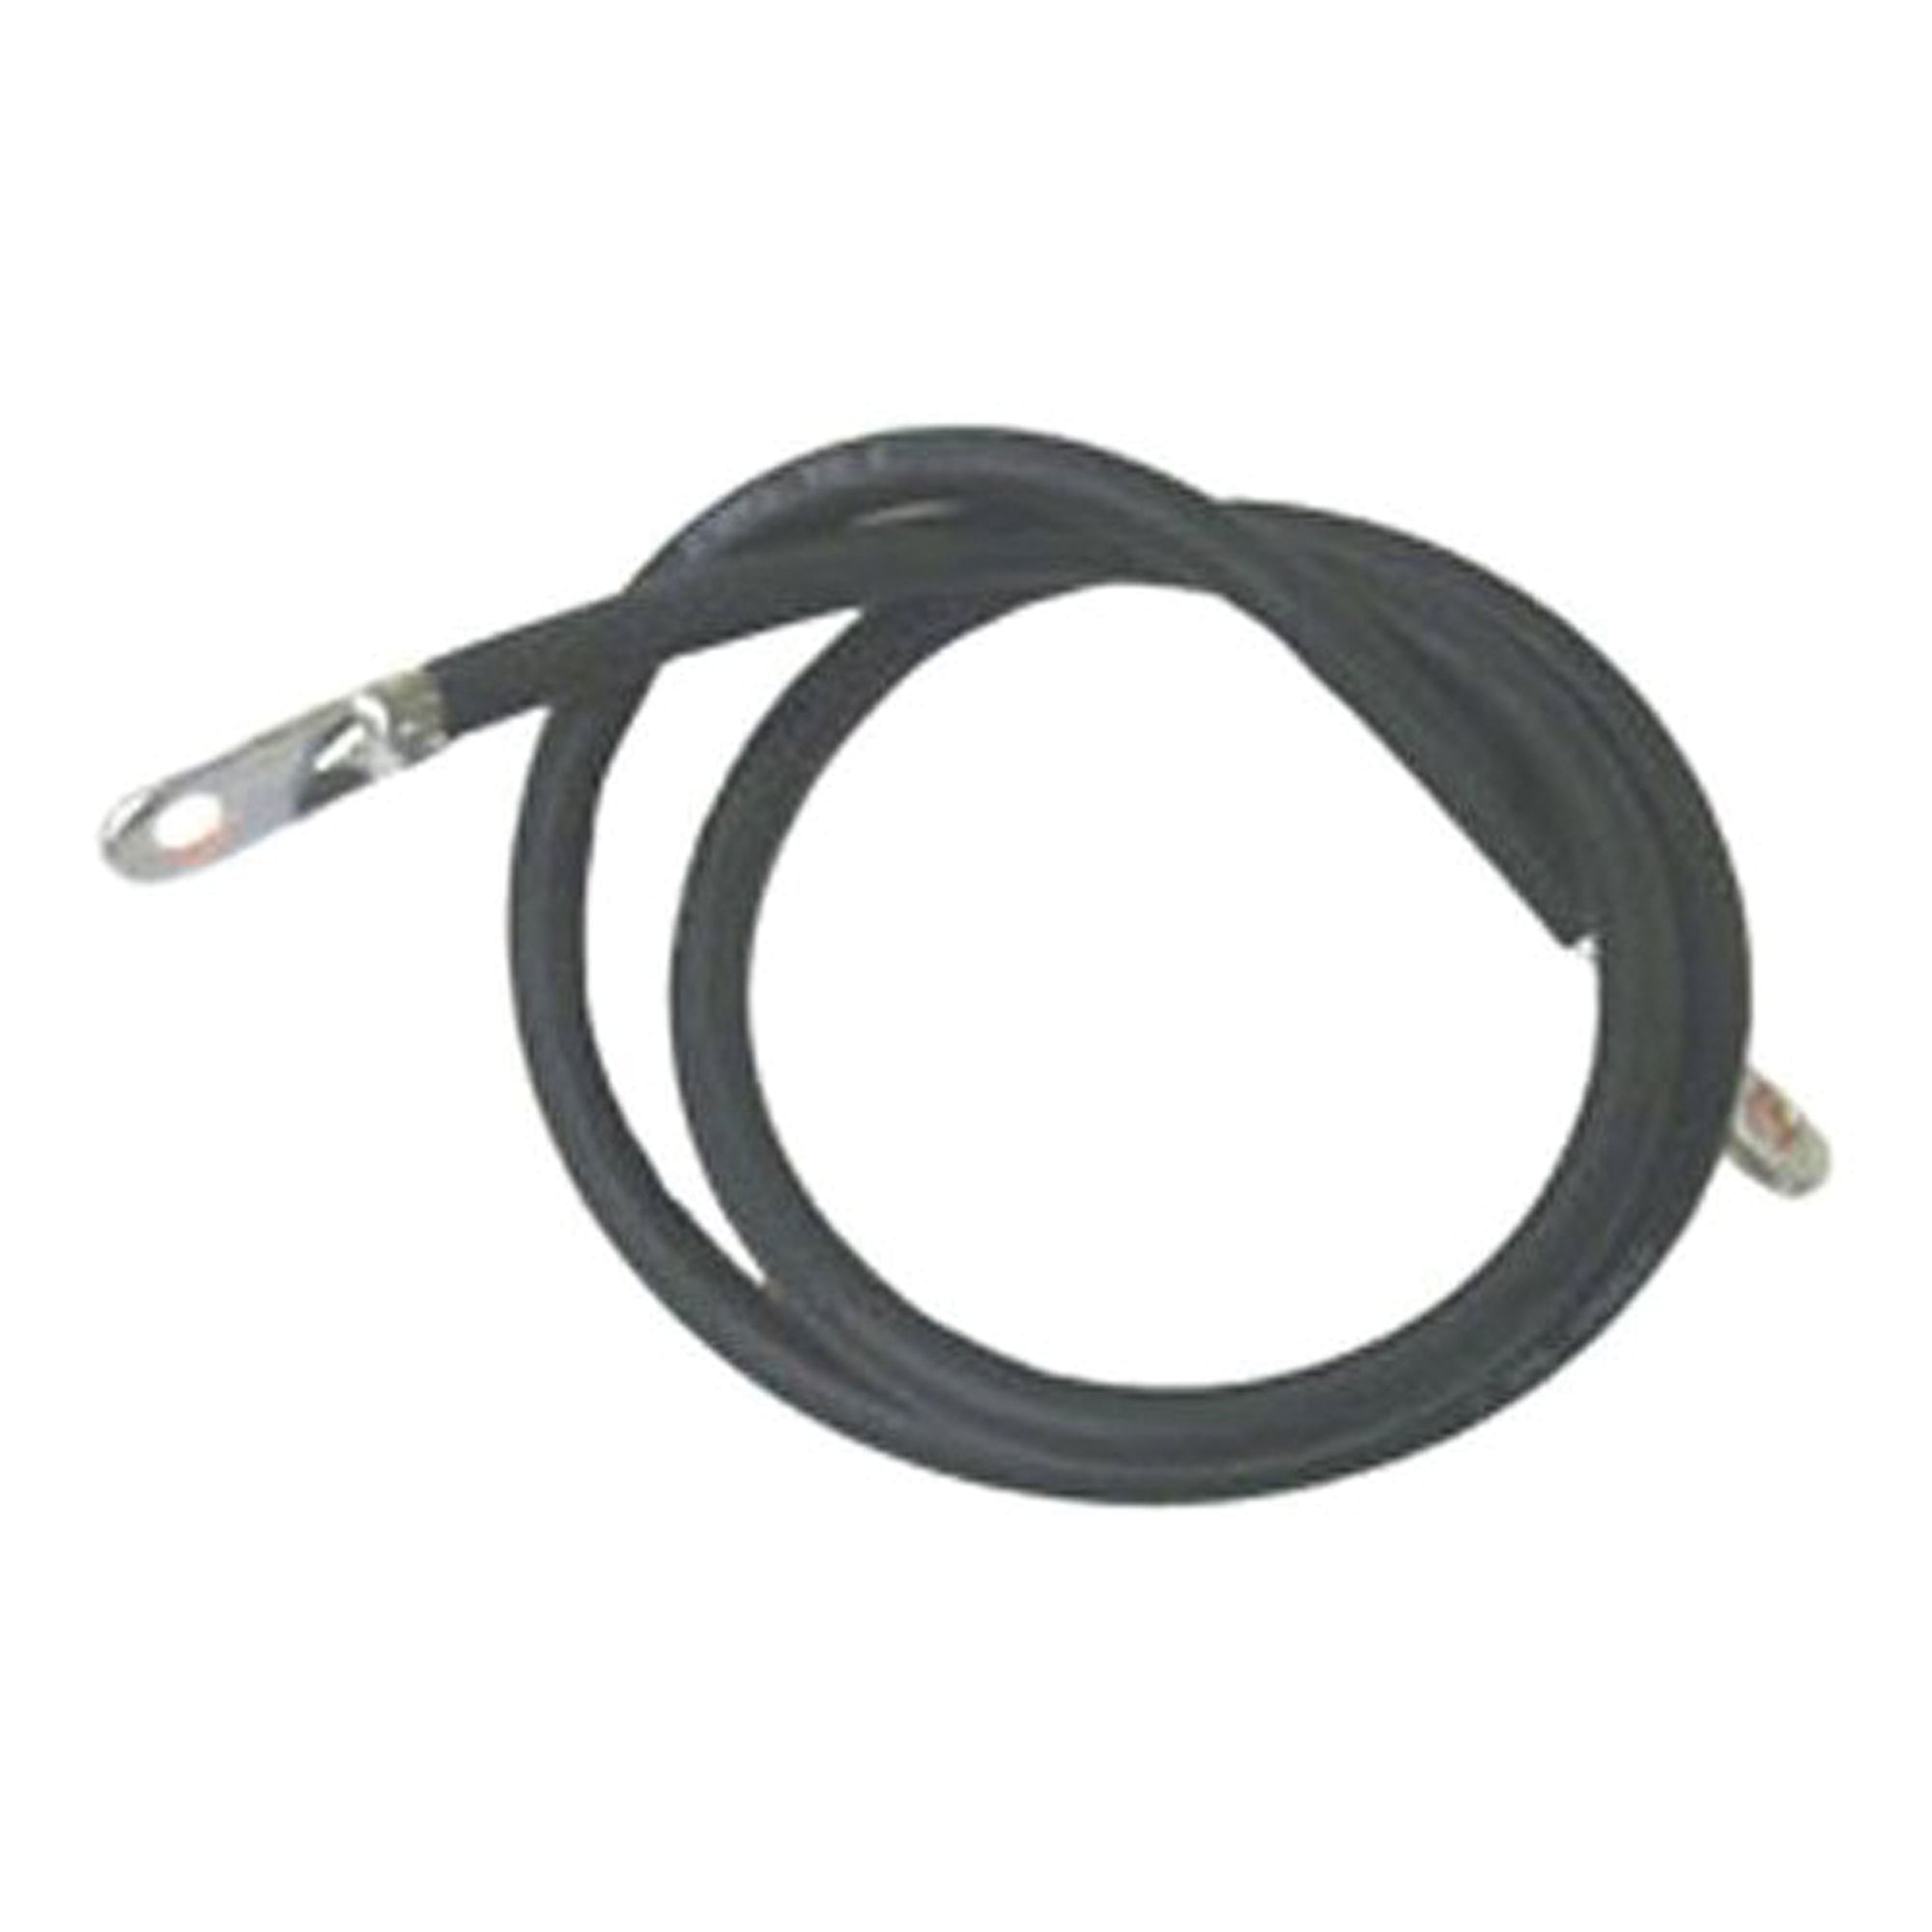 Sierra BC88533 Battery Cable With Terminals - 2 ft. Black, 4 Gauge